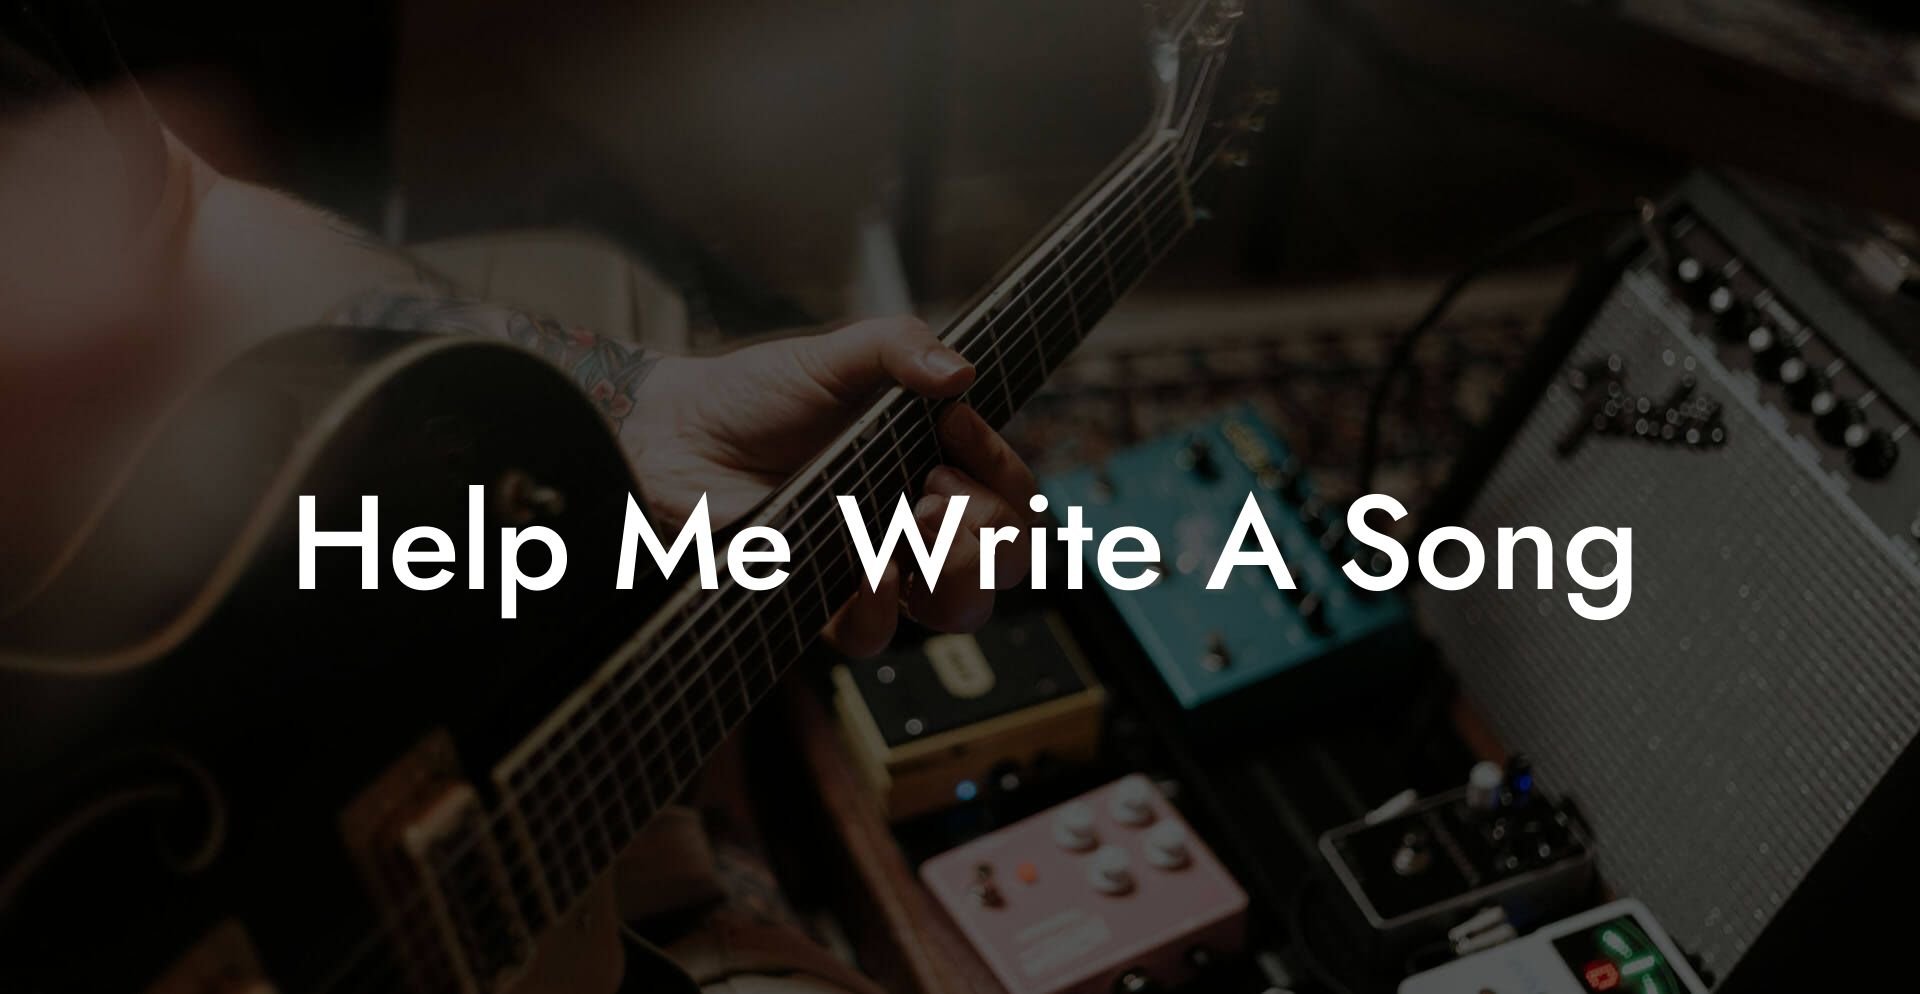 help me write a song lyric assistant